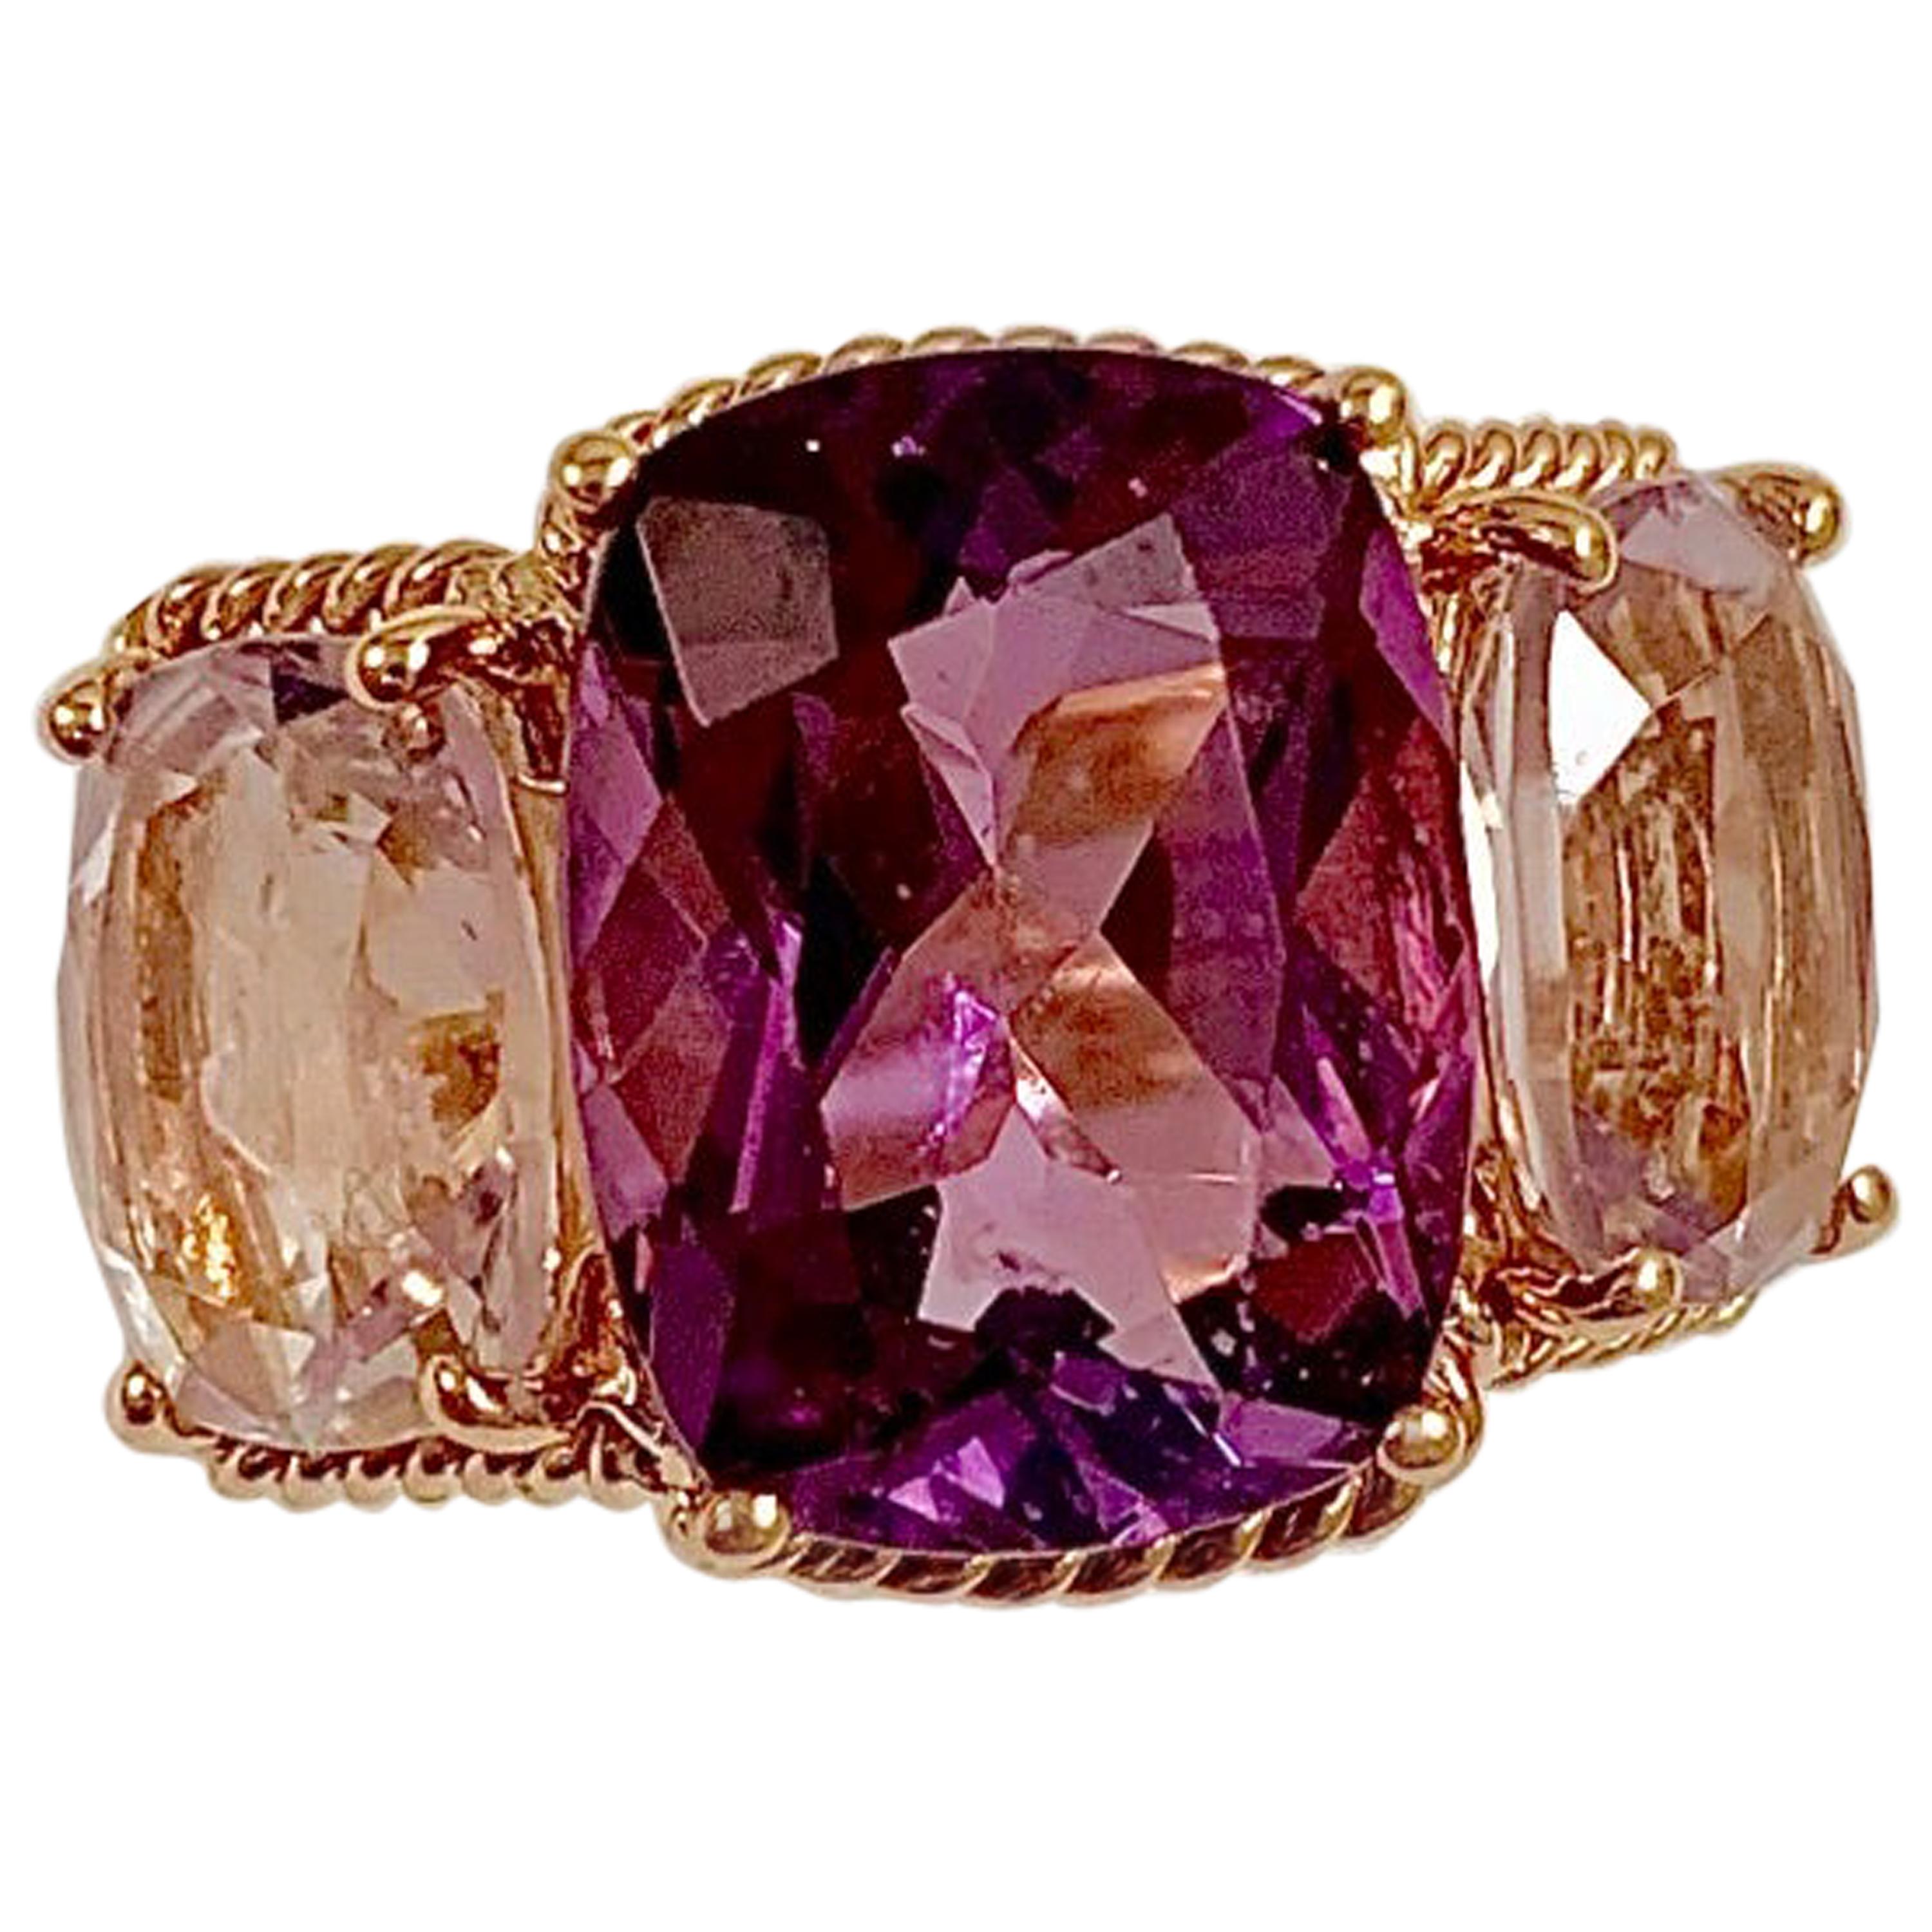 Elegant Three-Stone Amethyst Ring with Gold Rope Twist Border For Sale